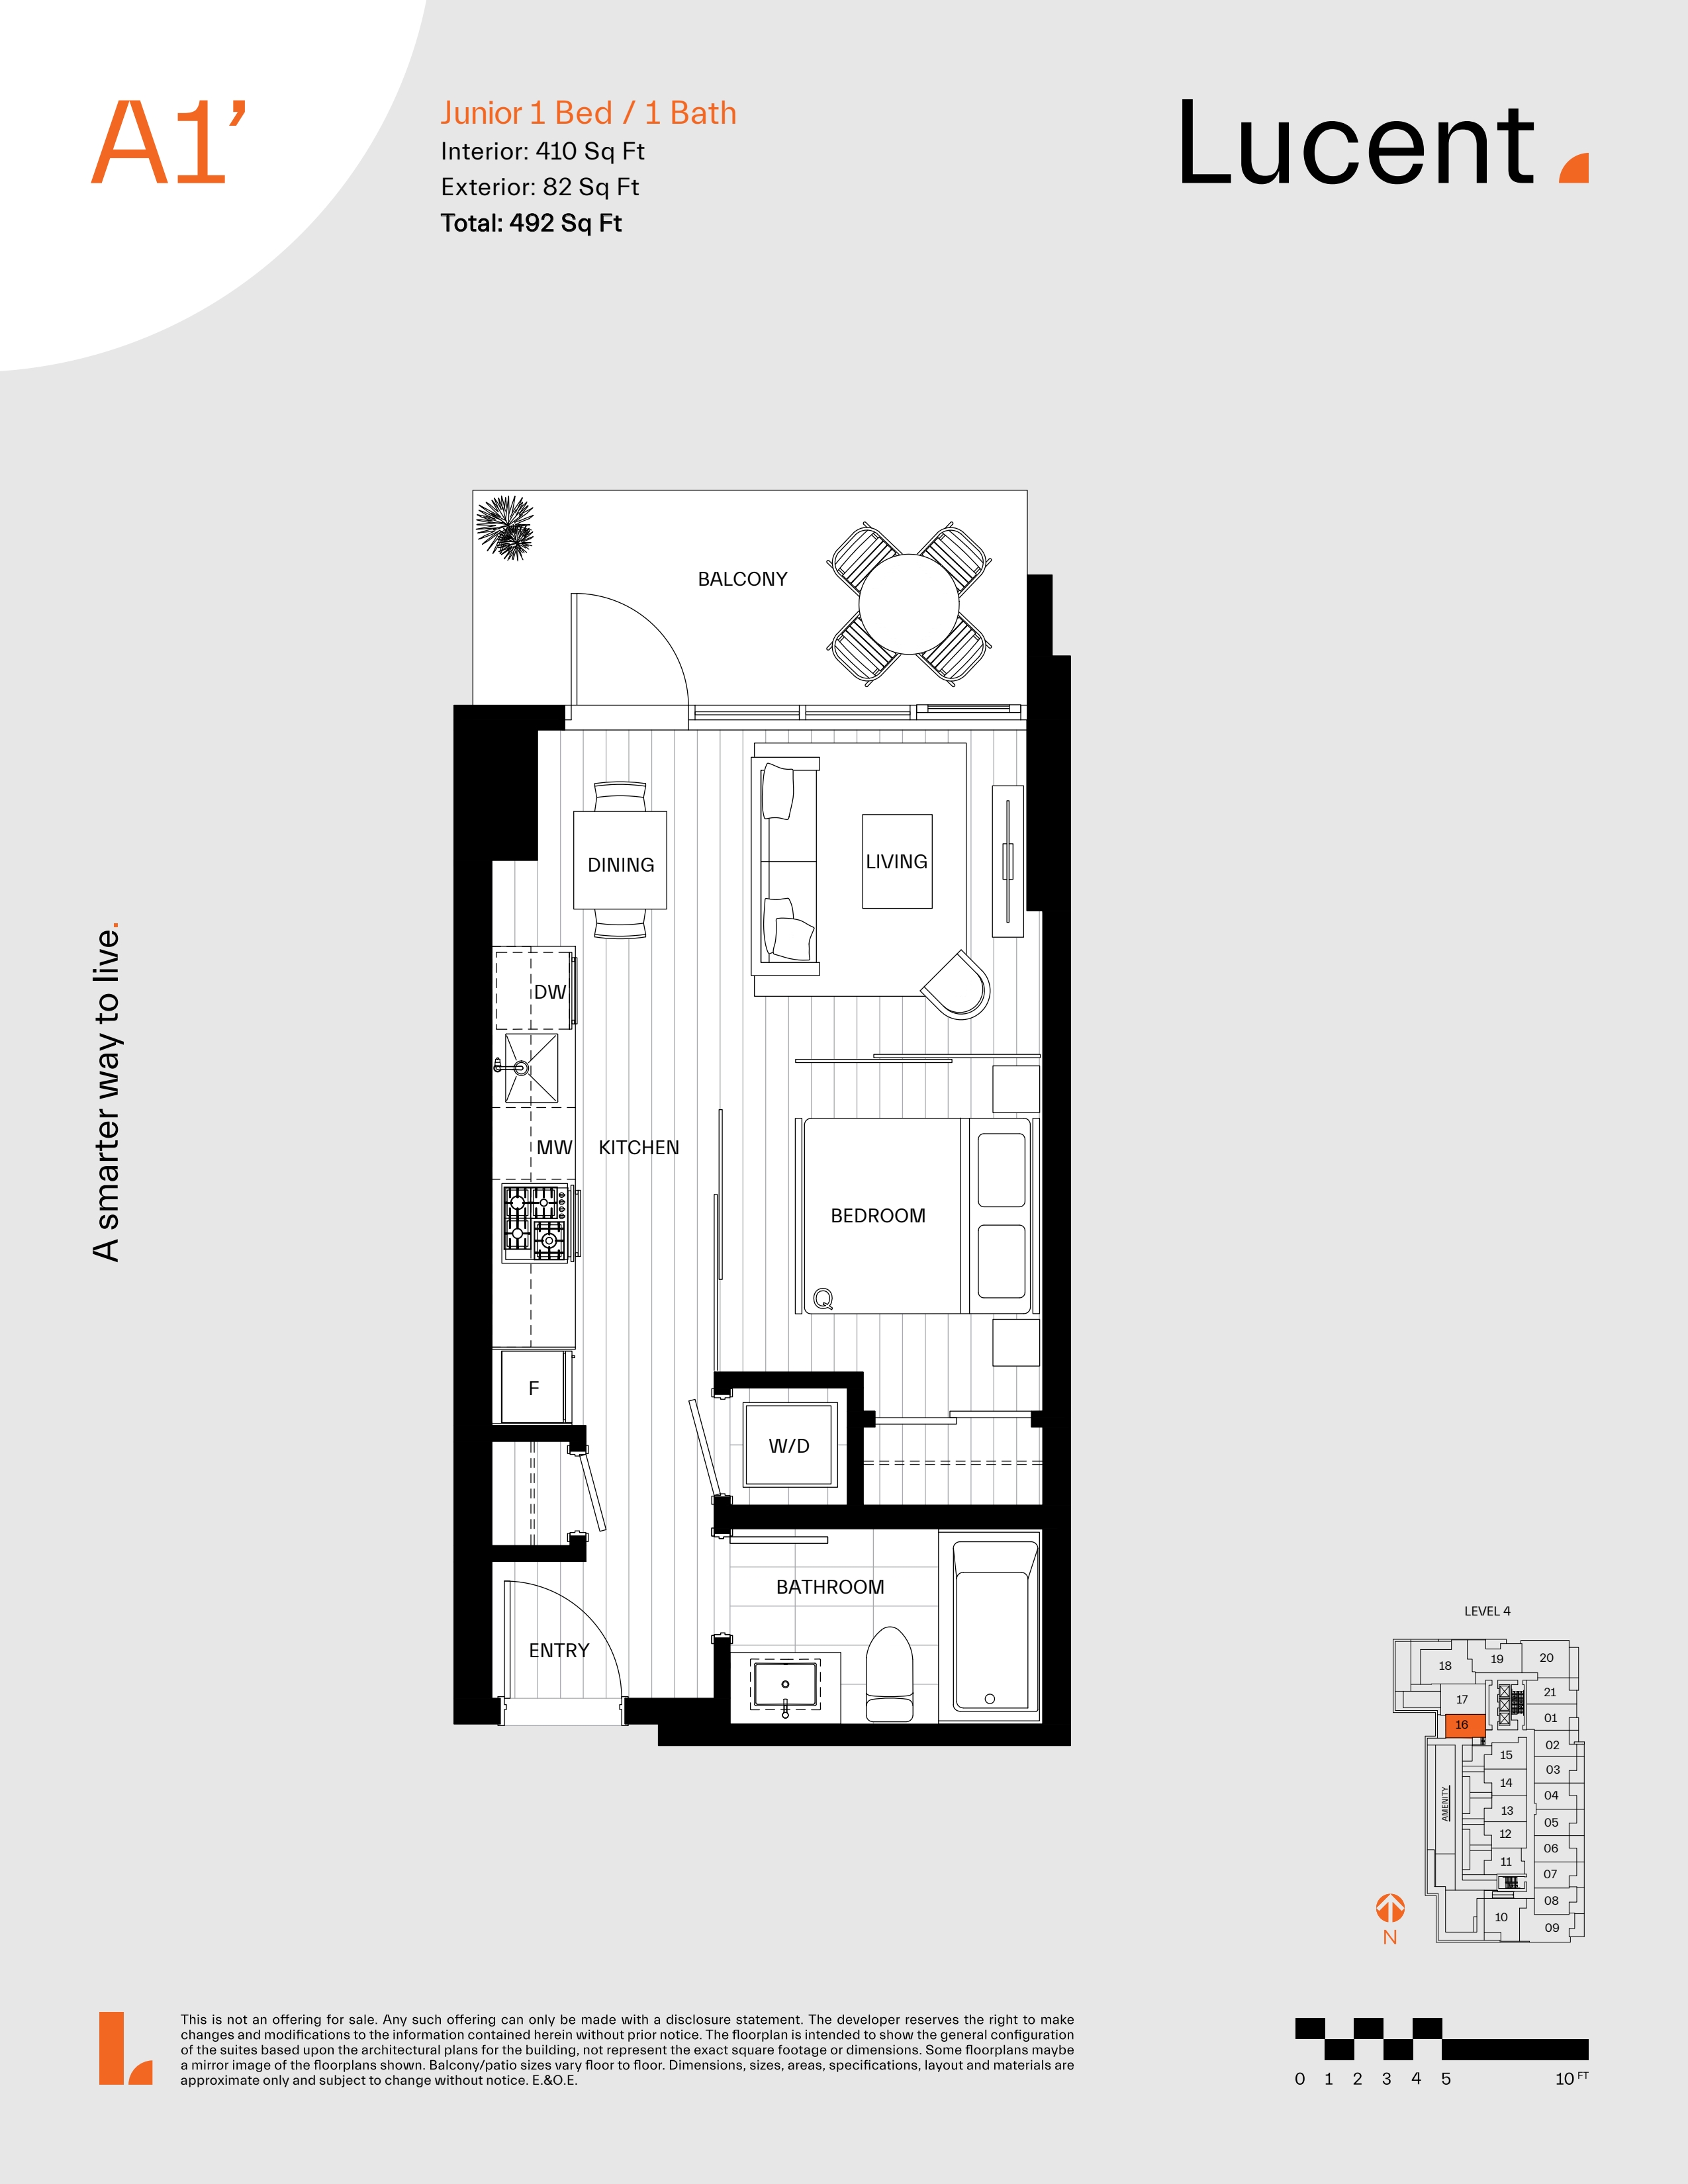  A1'  Floor Plan of Lucent Condos with undefined beds